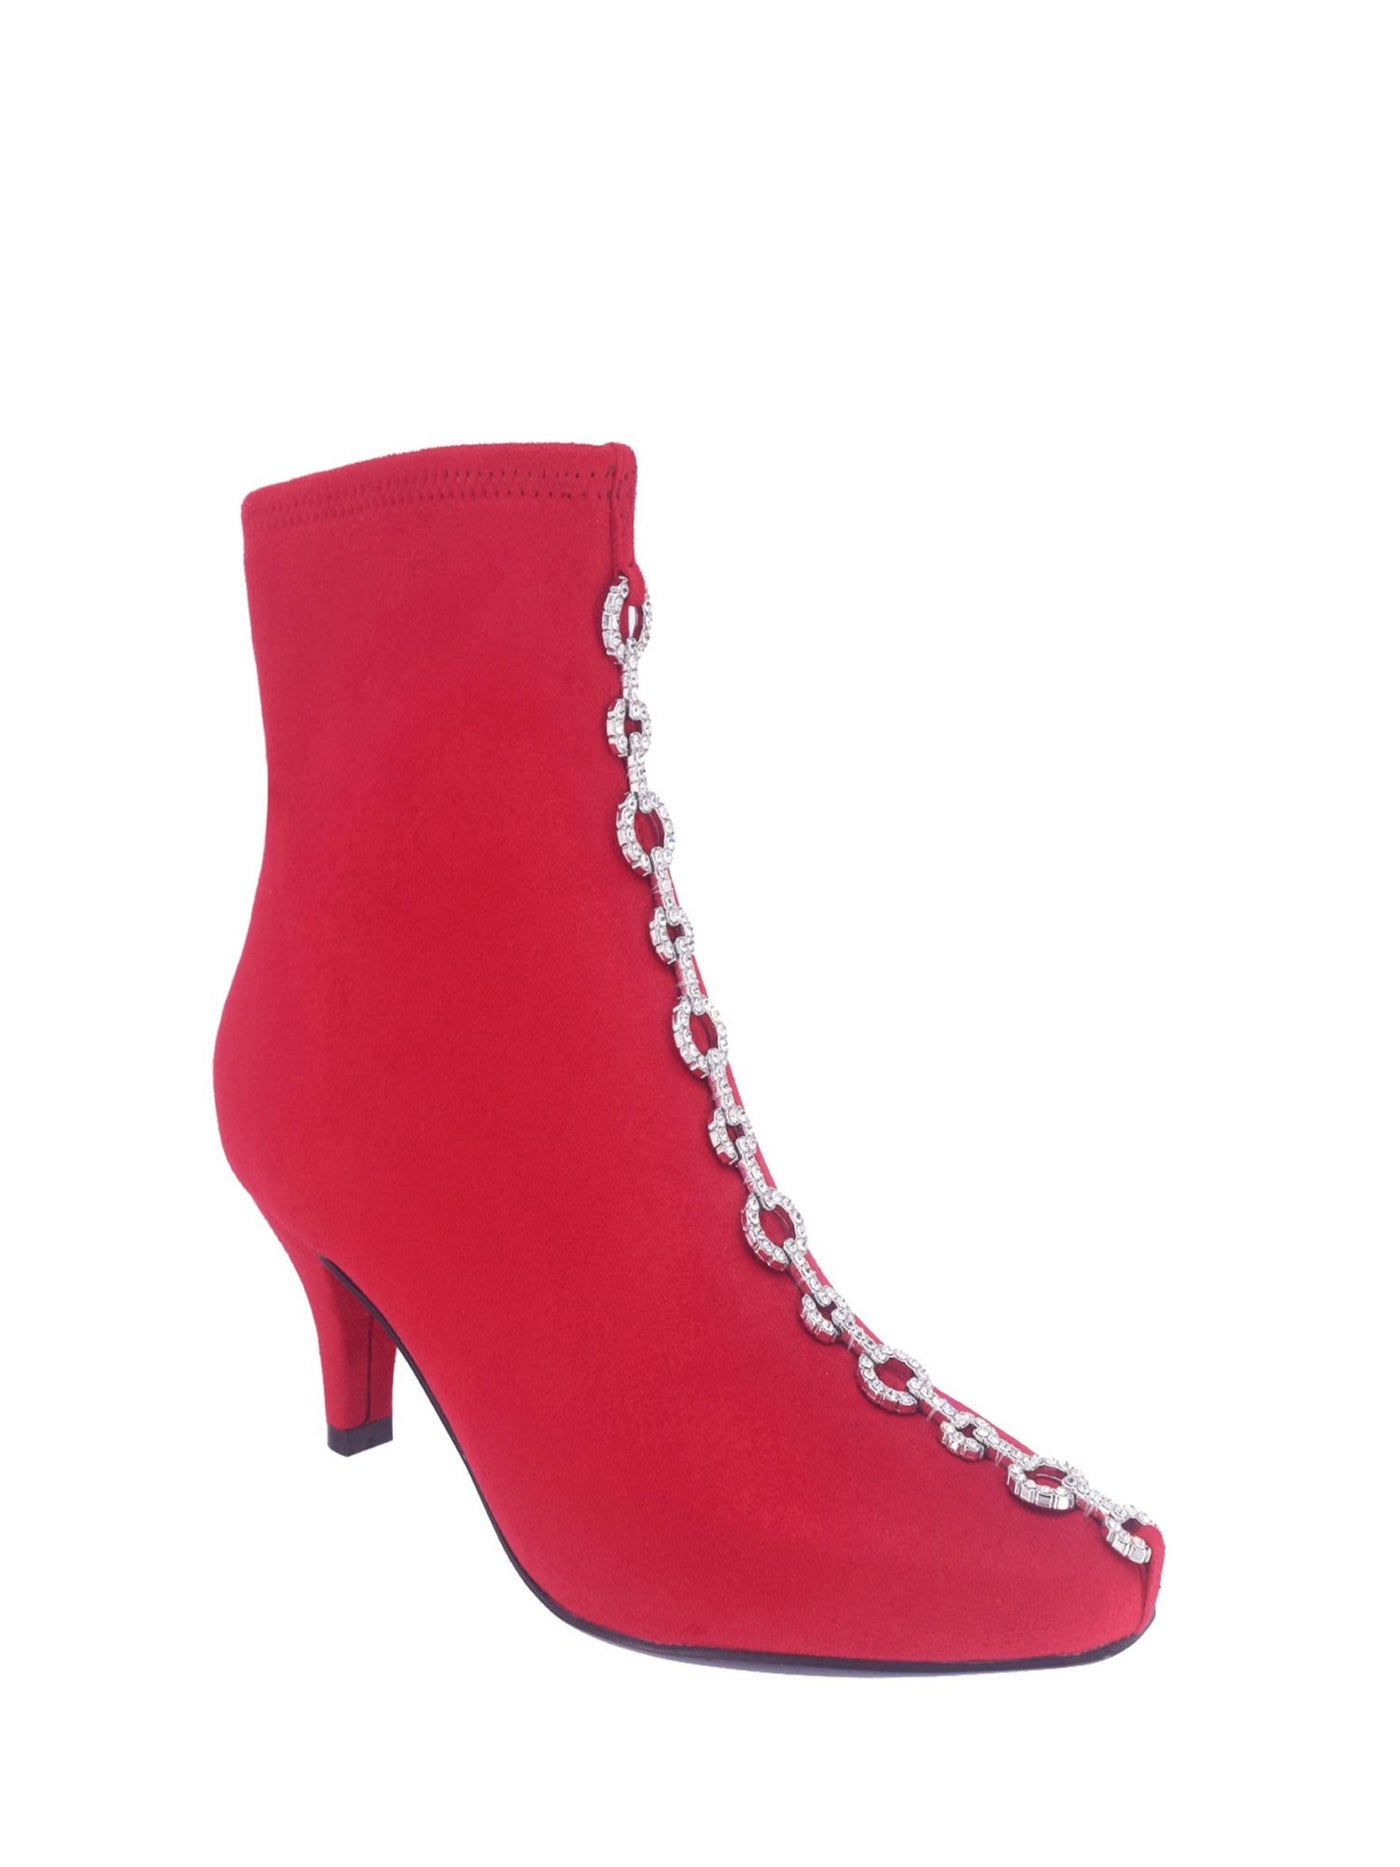 IMPO Womens Red Stretch Naja Chain I Square Toe Kitten Heel Zip-Up Heeled Boots 9.5 M